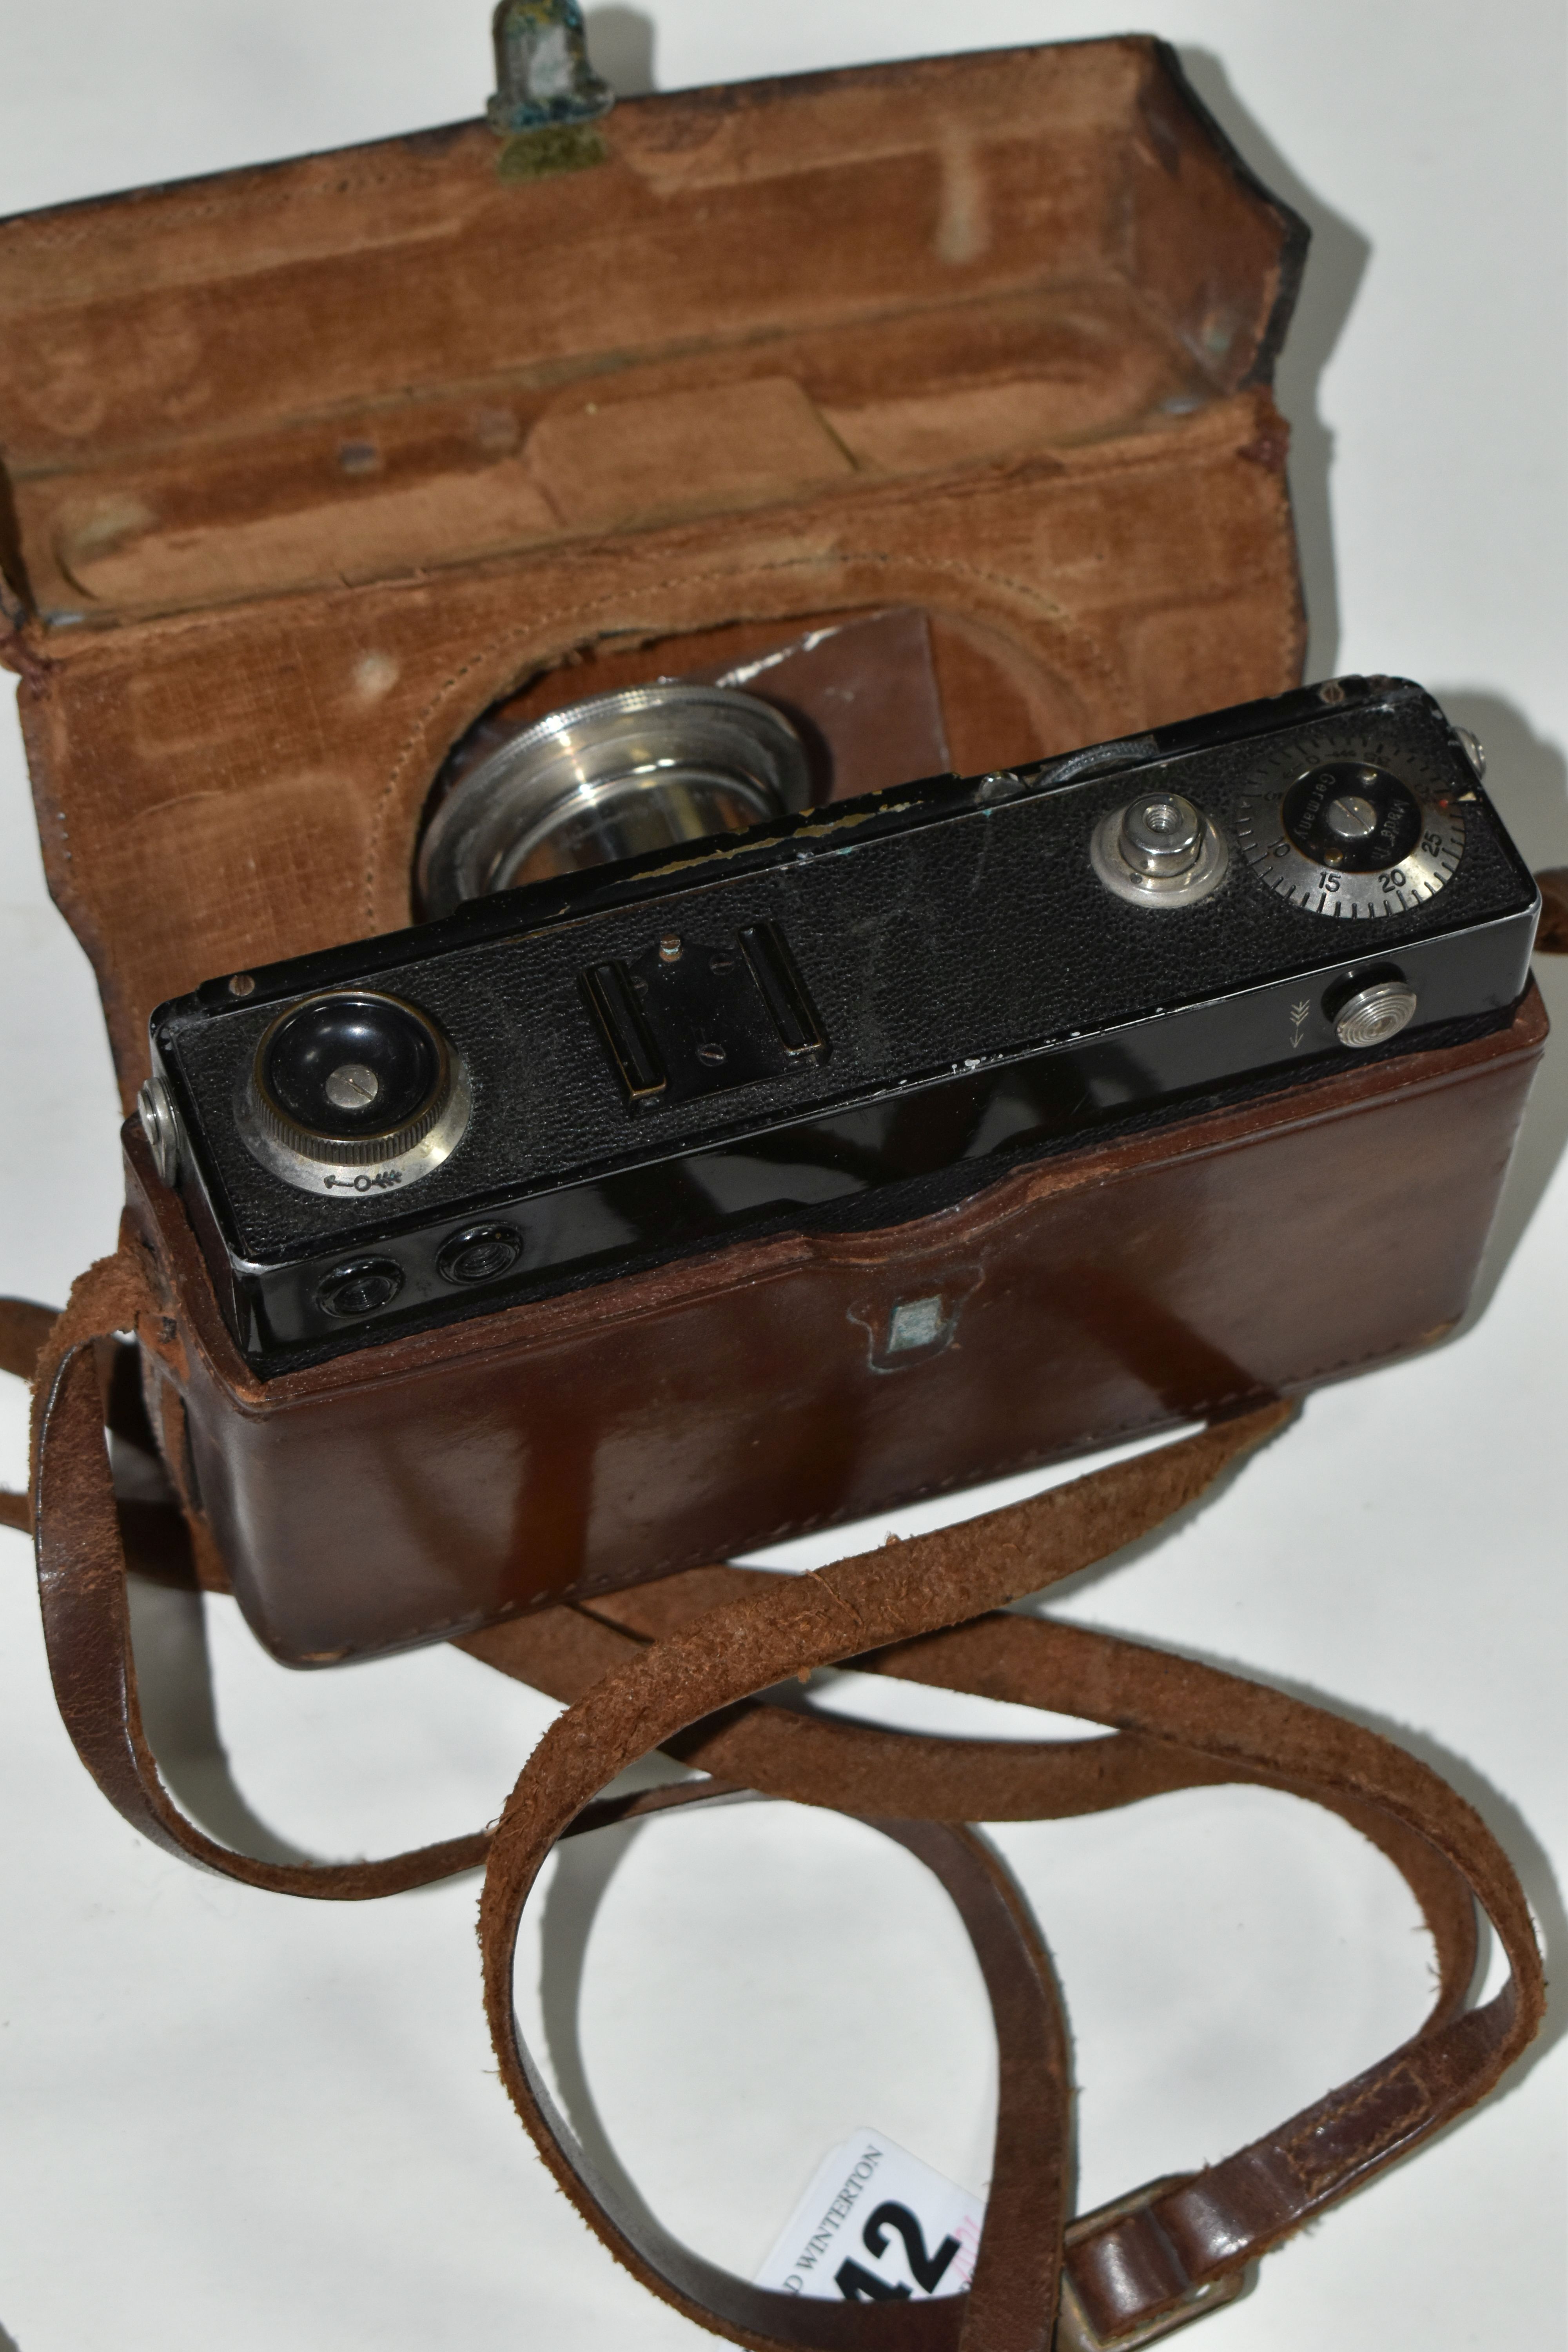 A ZEISS IKON CONTAX 1 FILM CAMERA, together with a Zeiss Ikon Jena 5cm f3.5 lens and leather case, - Image 5 of 5